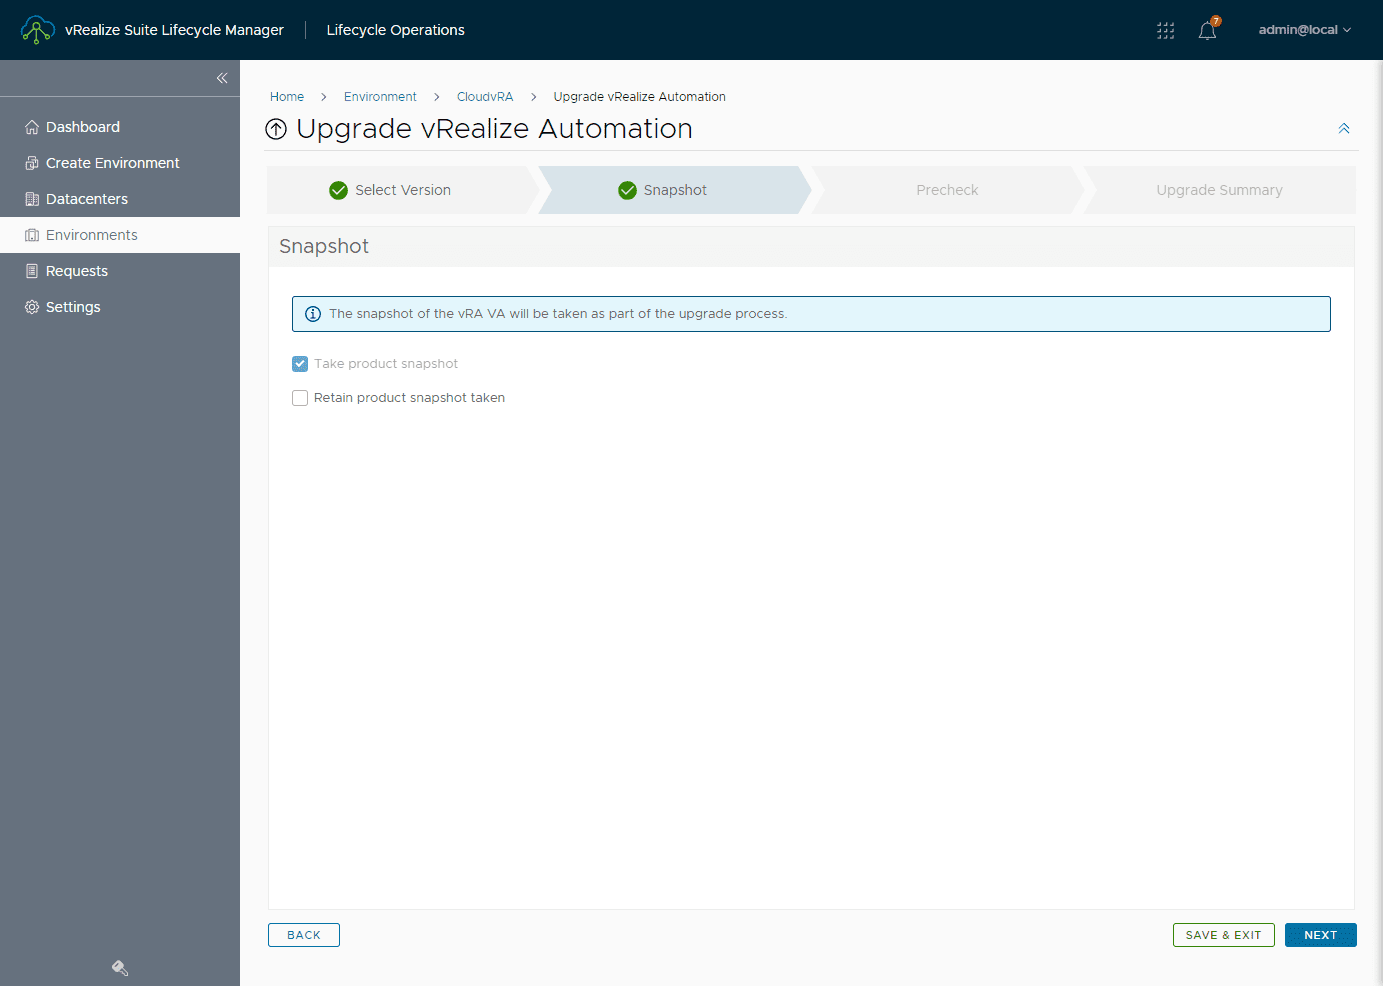 Take a product snapshot of your existing vRealize Automation virtual machine